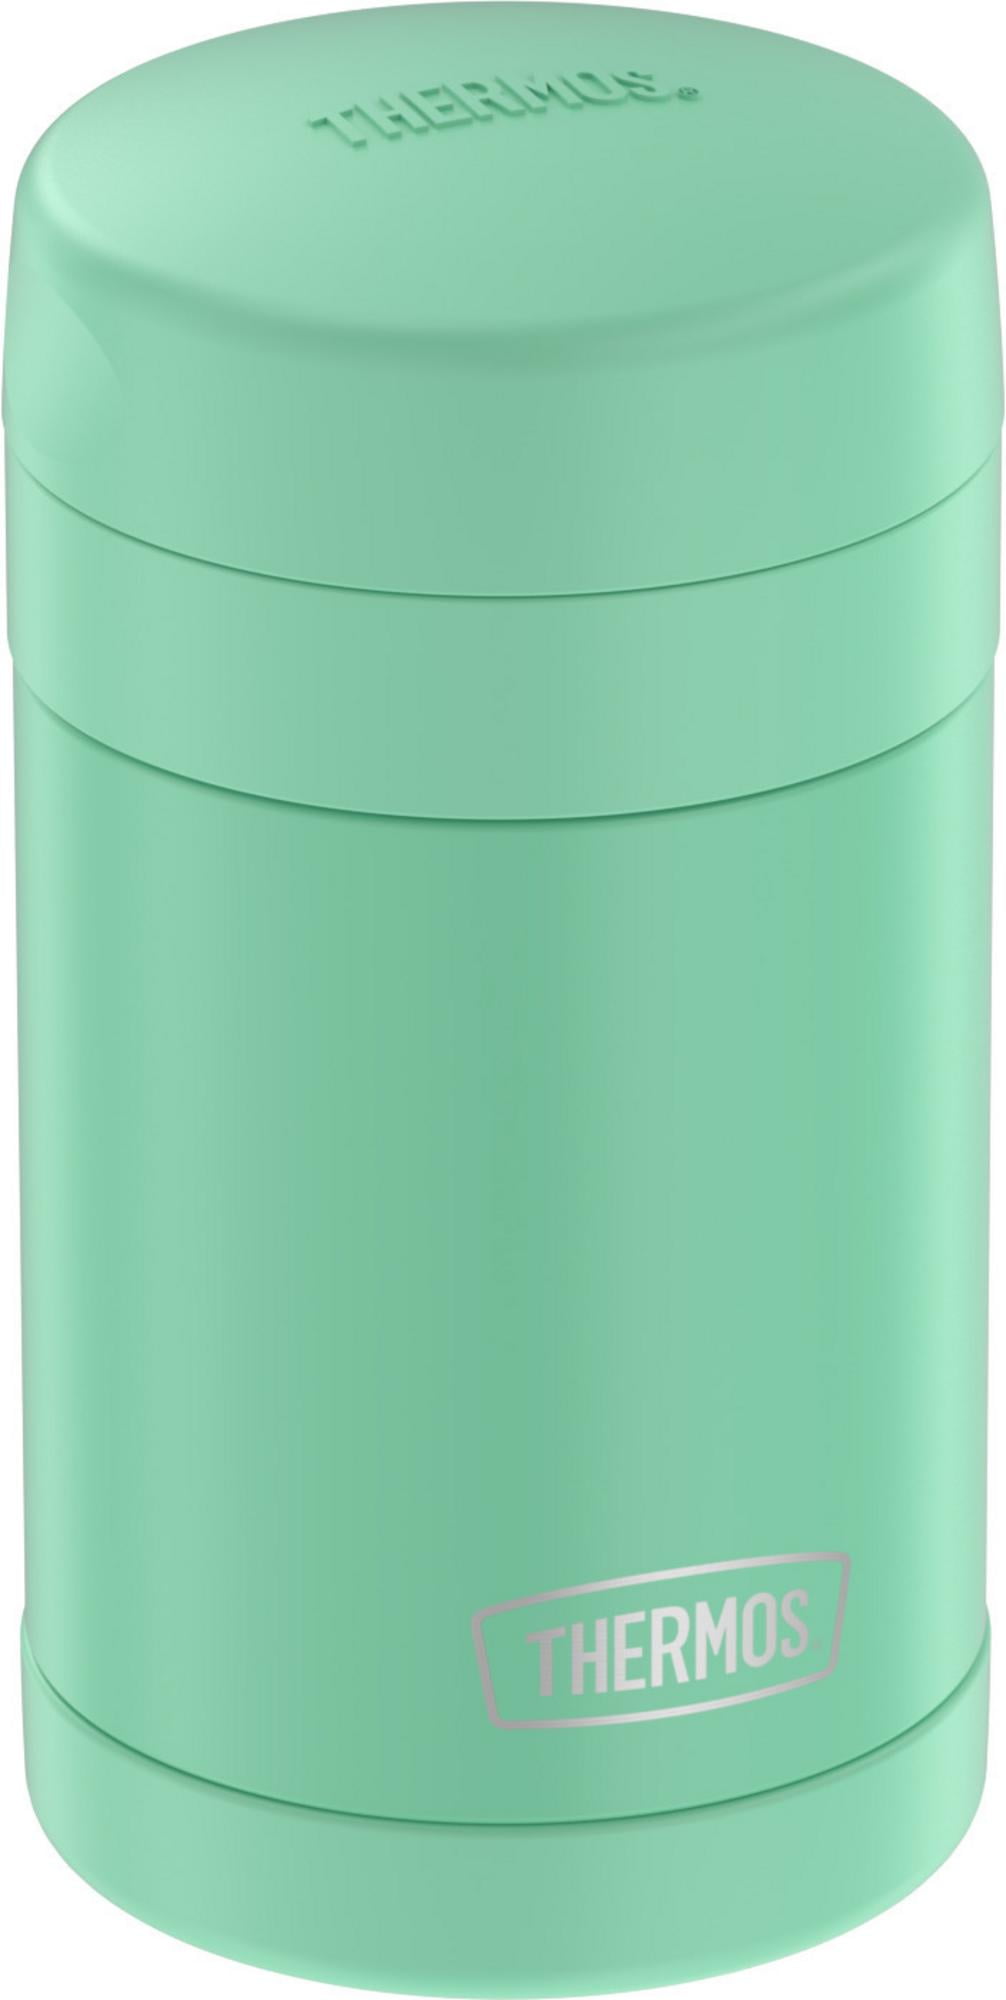 Thermos® F31101SL6 - Funtainer™ 16 oz. Stainless Steel Gray Food Jar 